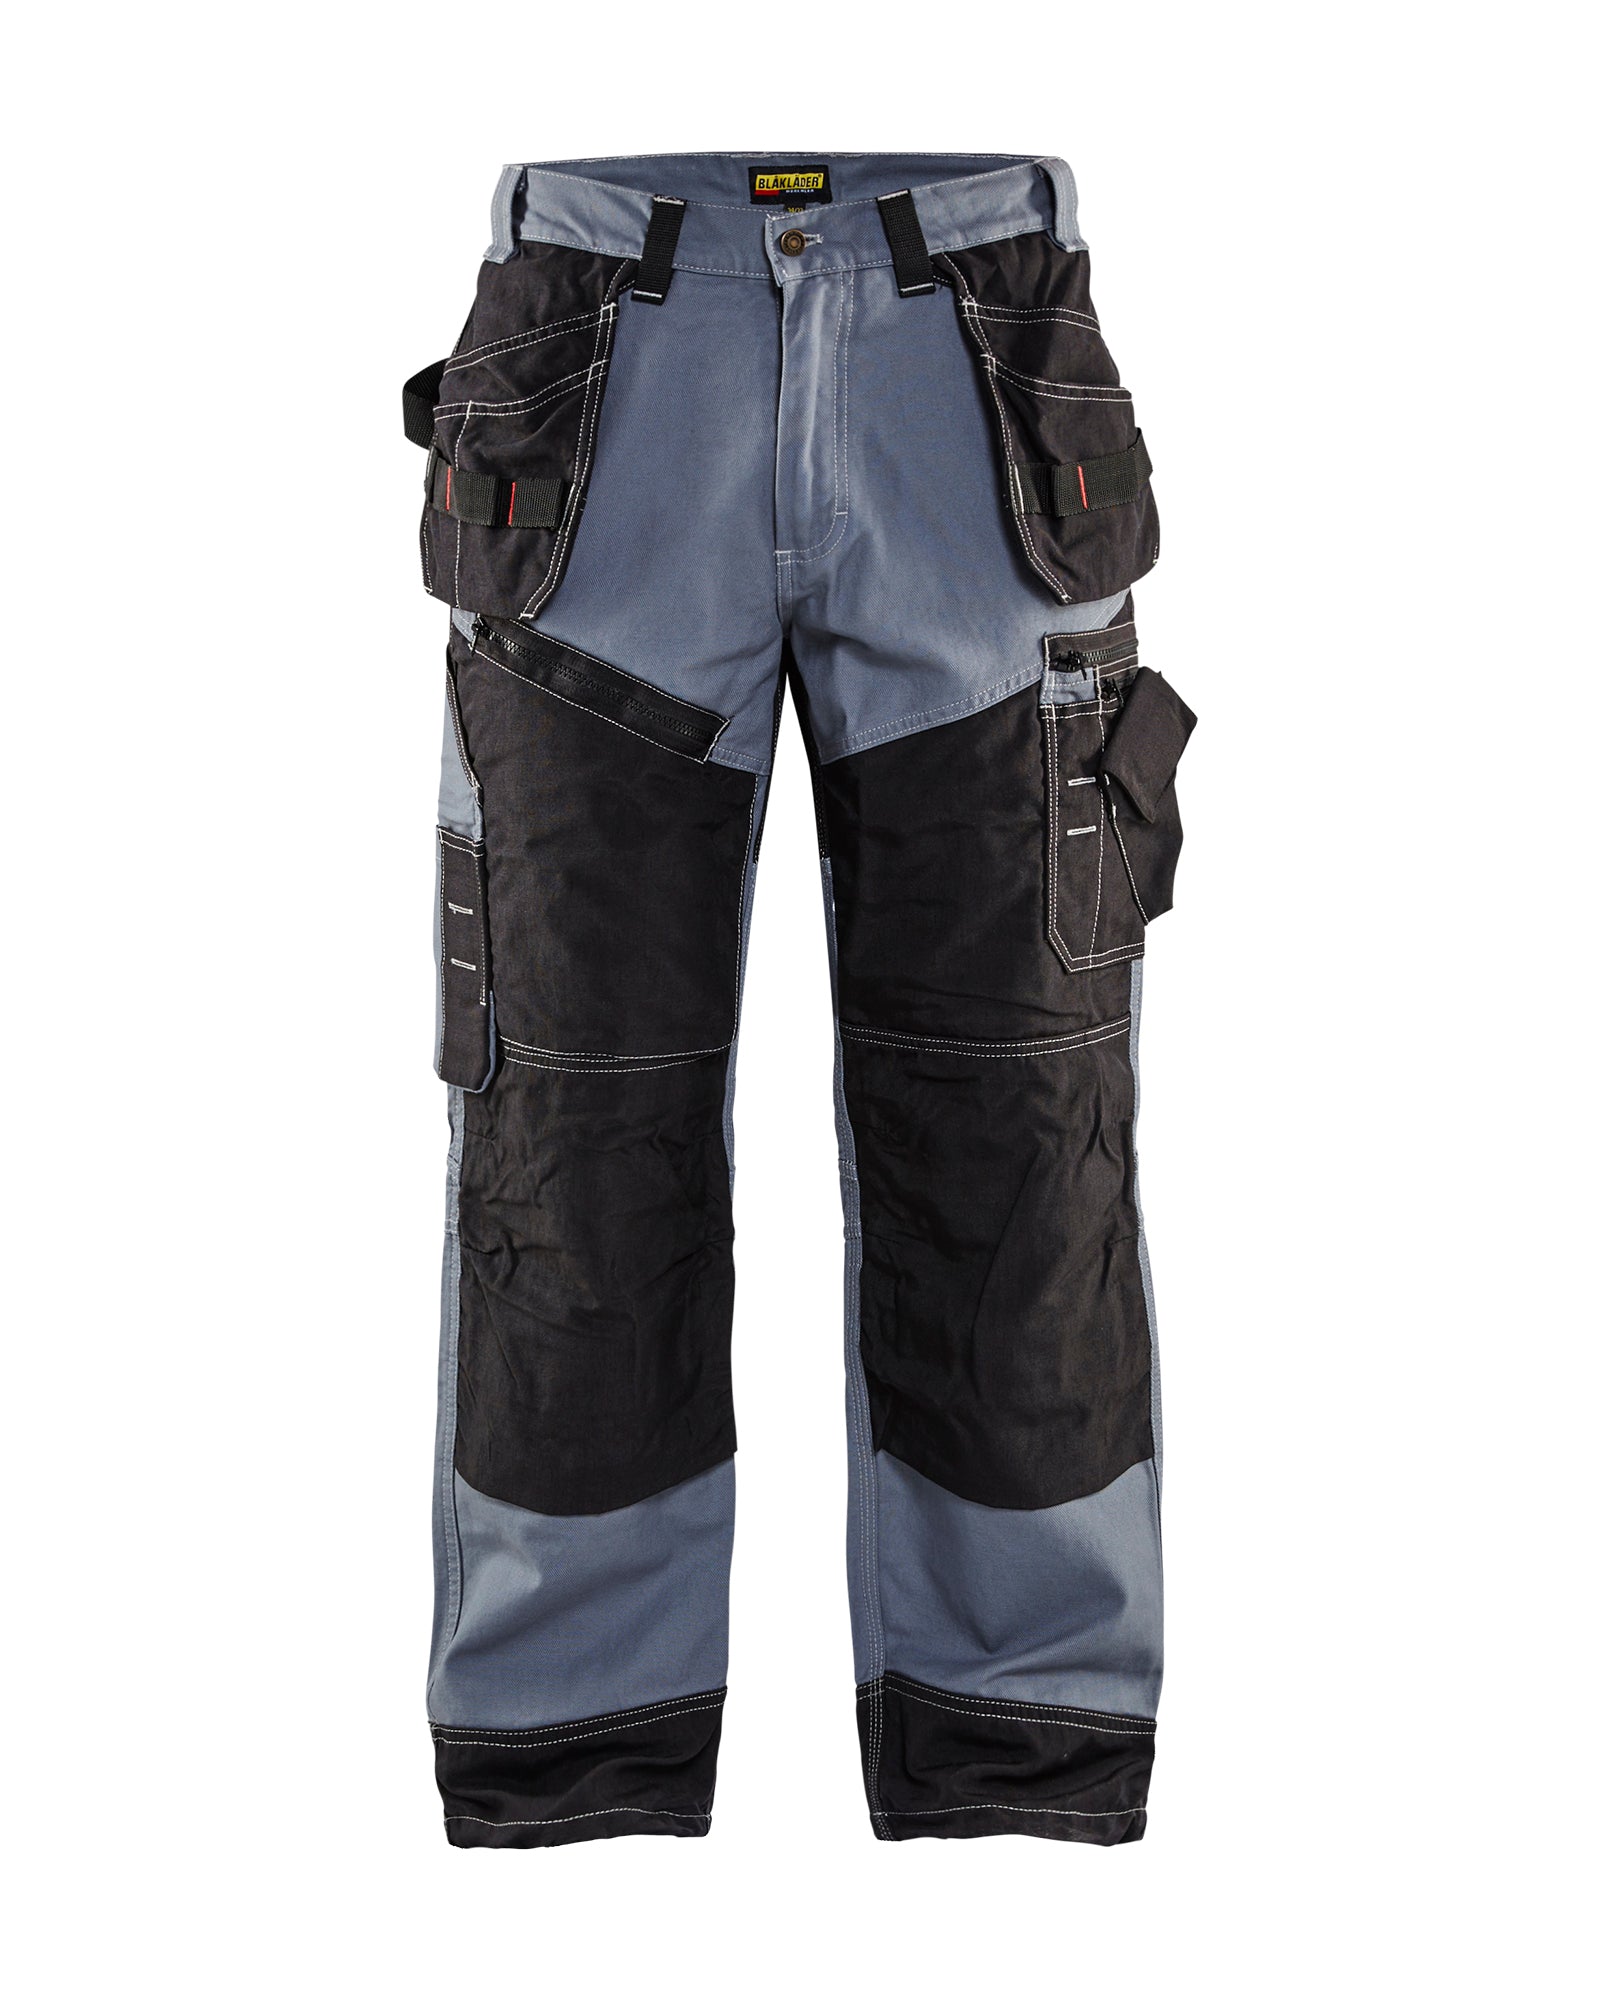 Men's Blaklader X1600 Pant in Grey/Black Craftsmen from the front view